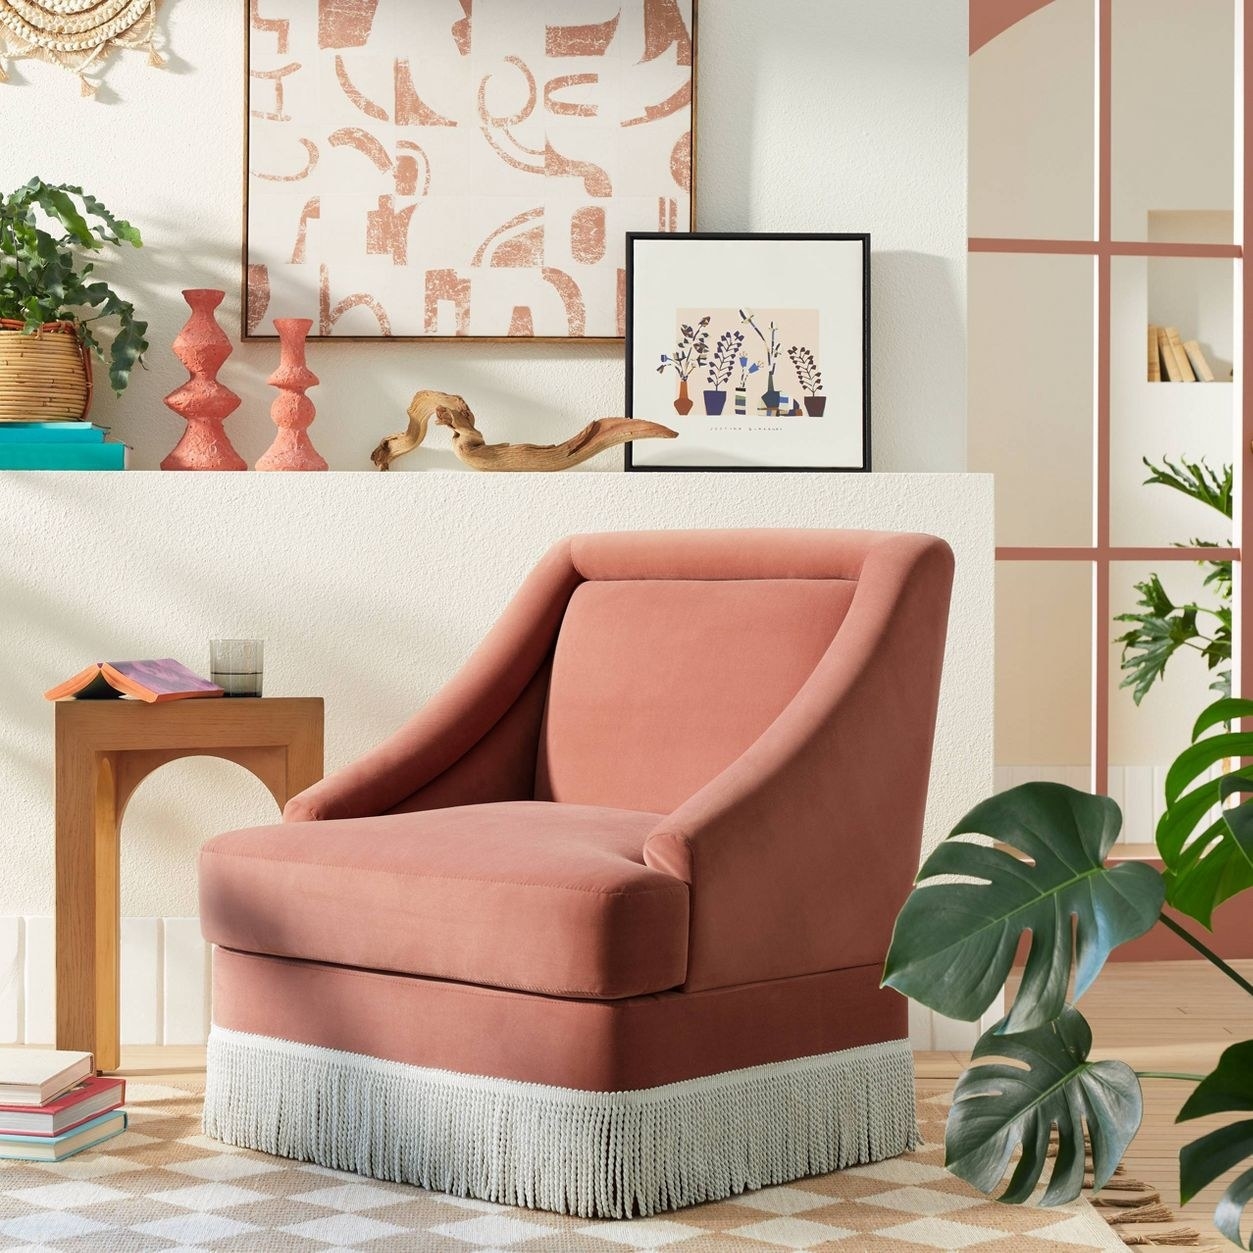 The chair in pink in a room